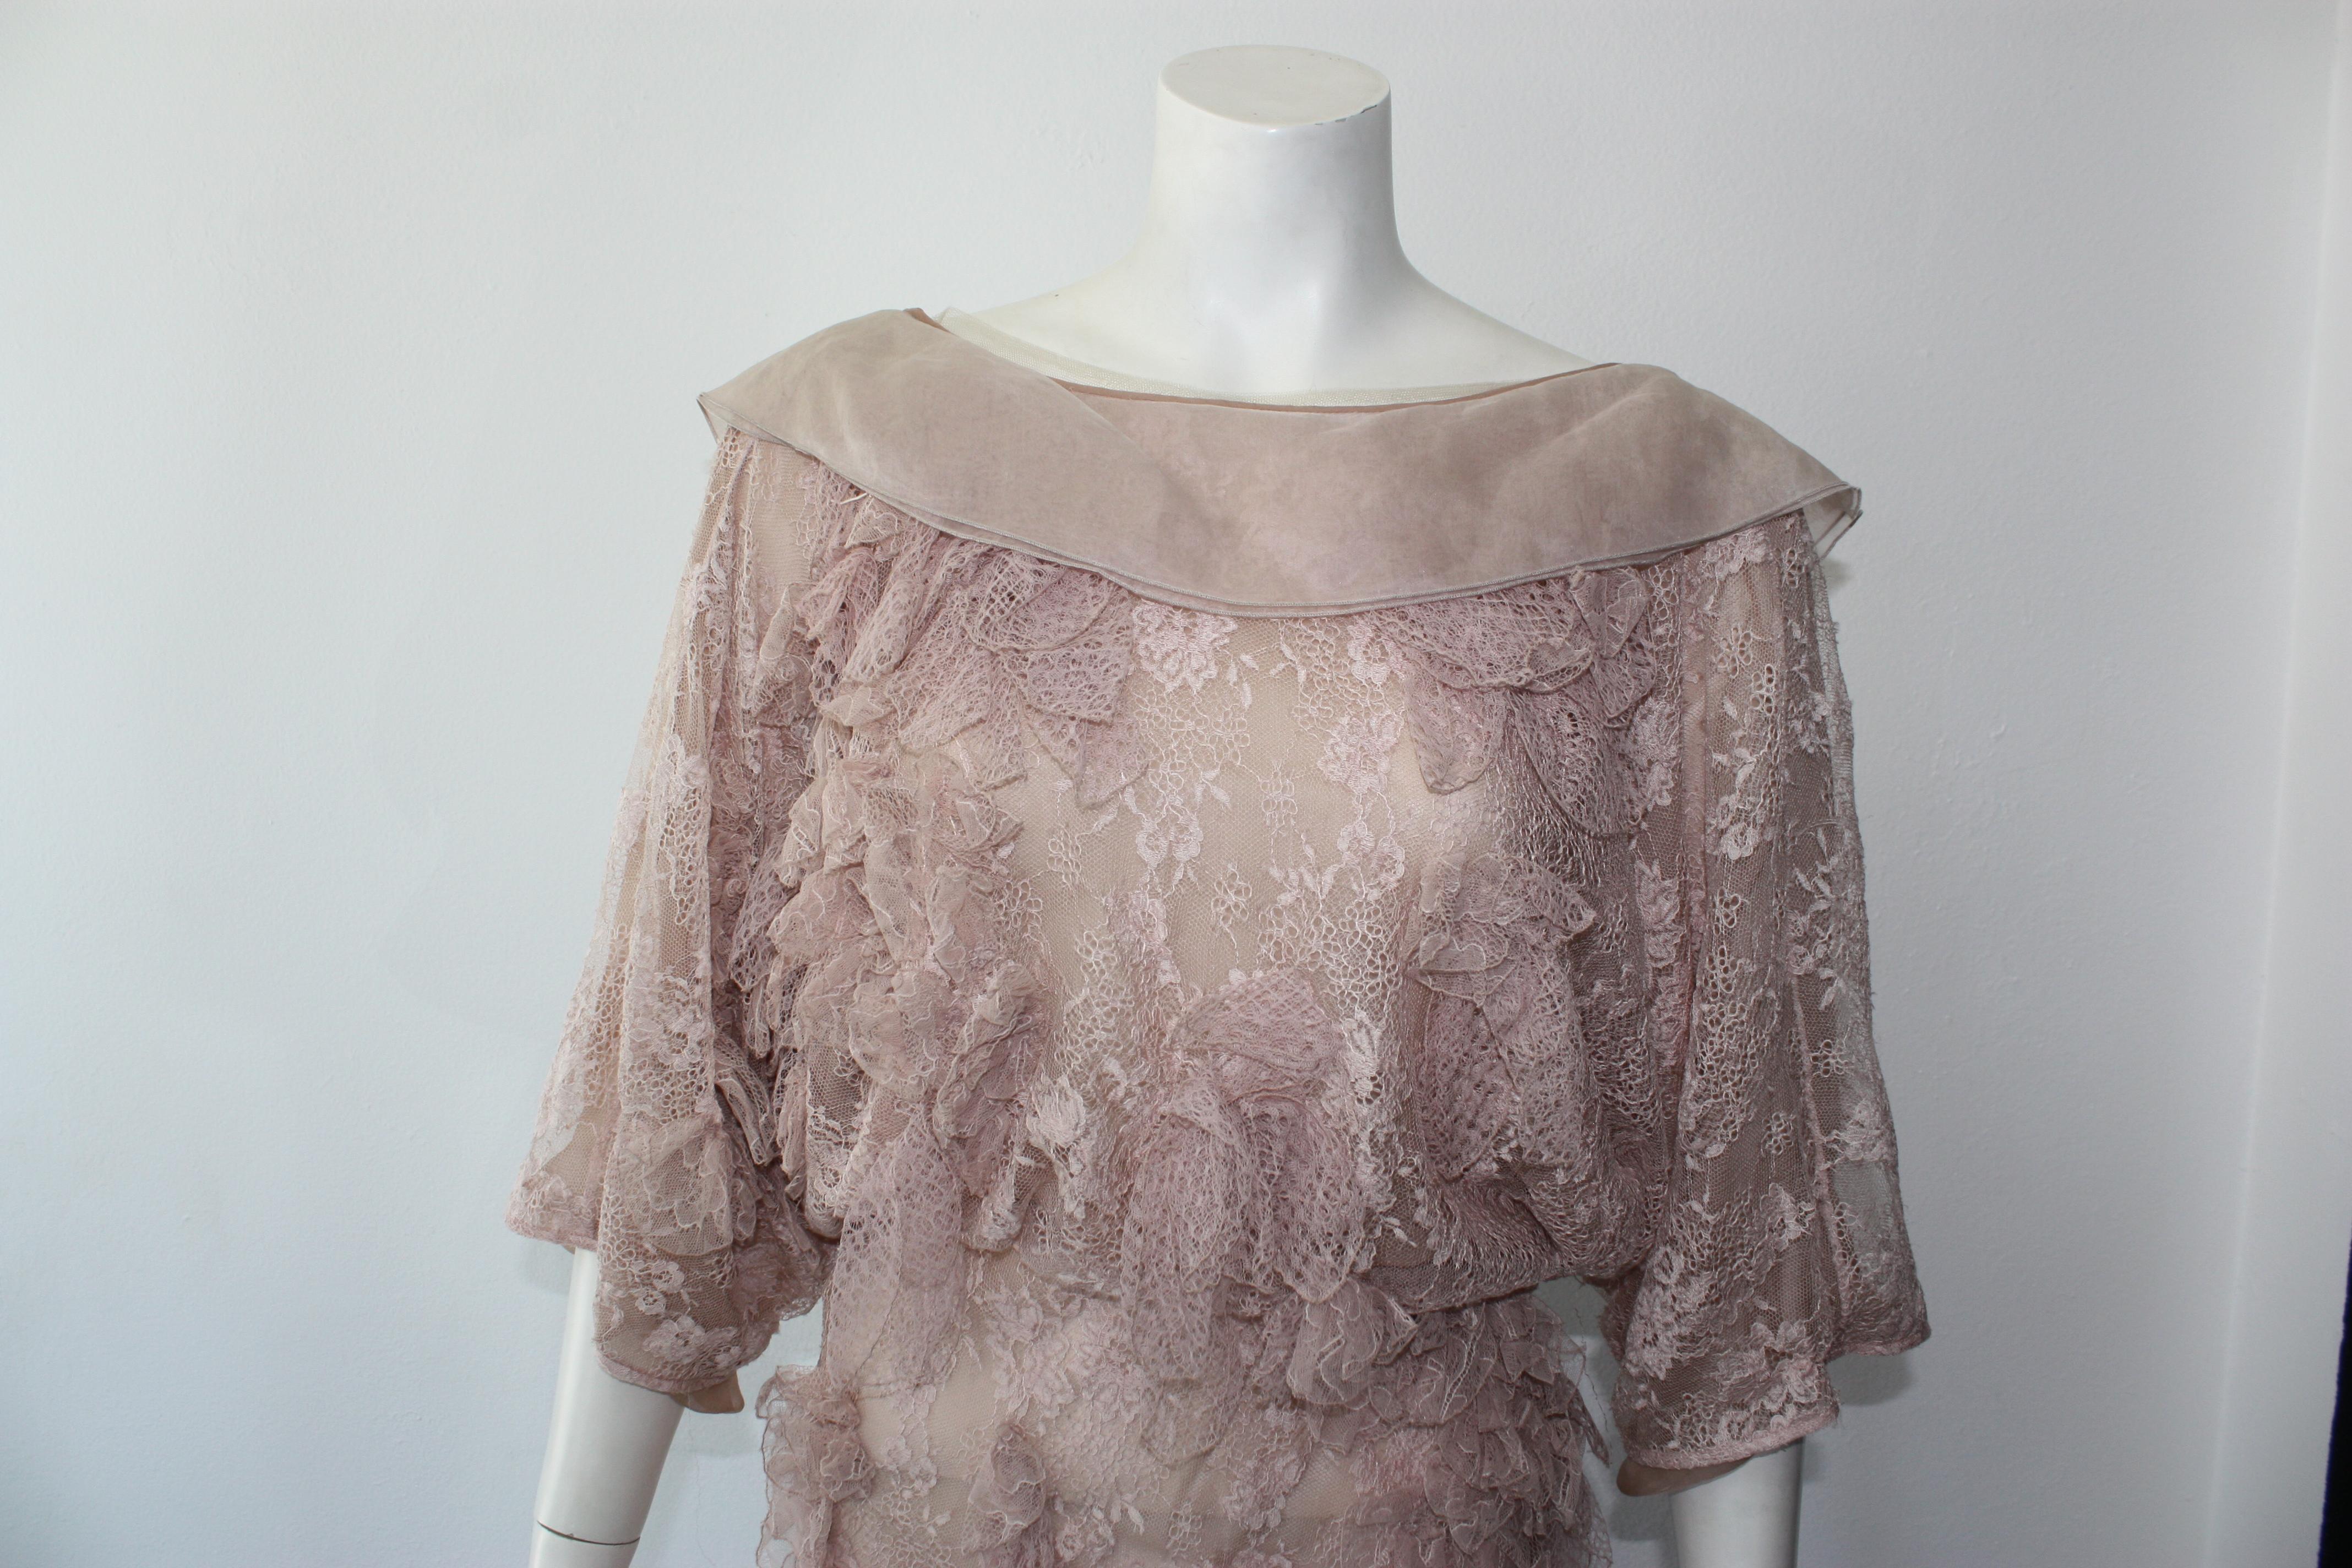 Valentino blush pink lace dress with lace applique throughout. Draped open back with crossover surplice skirt. Button snap closure.

New with tags, but minor snags throughout.
Size S
100% silk
